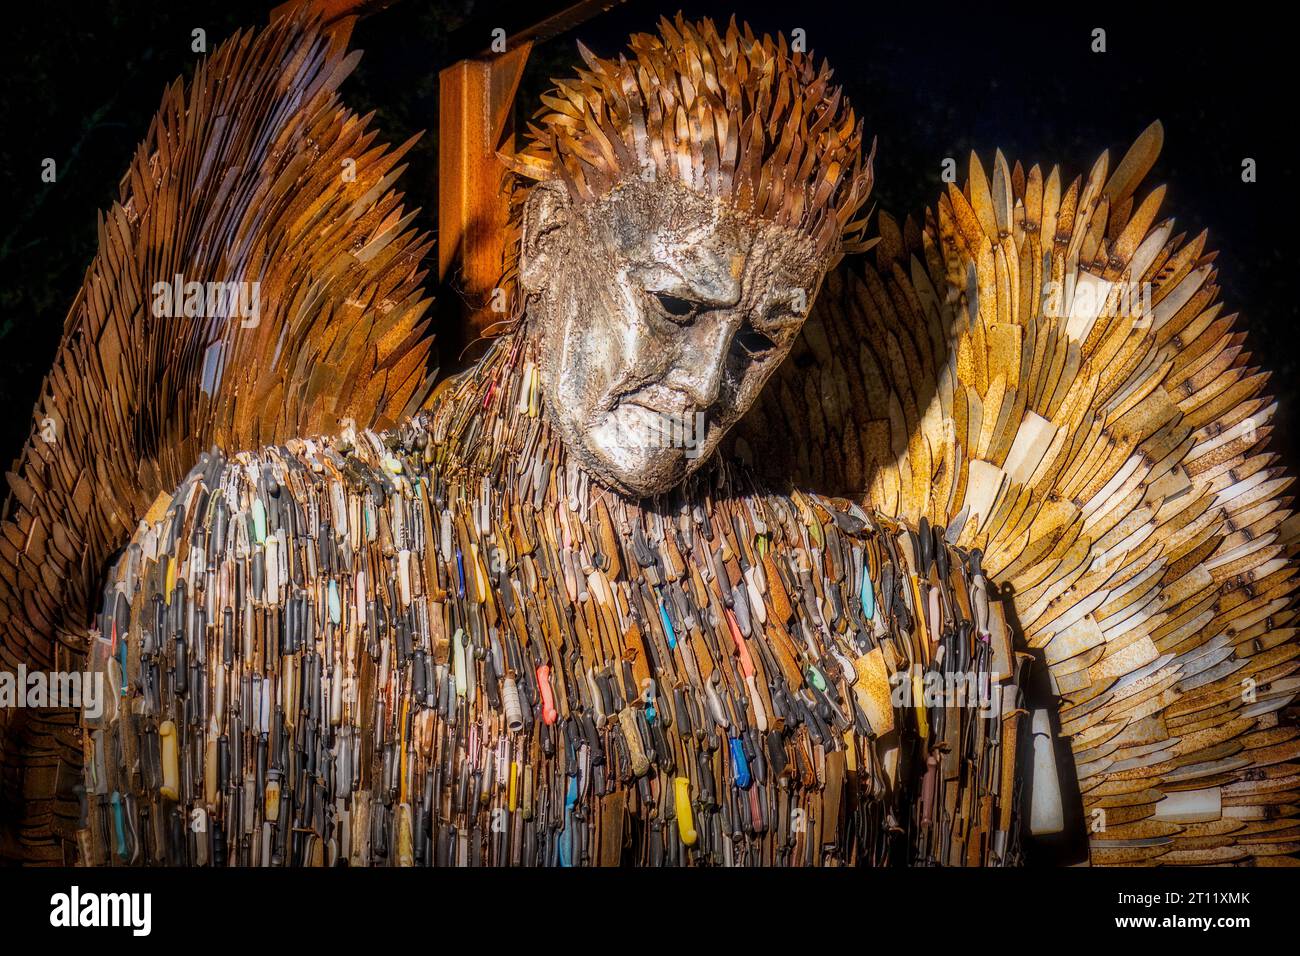 The Knife Angel - Contemporary sculpture formed of 100,000 knives created by artist Alfie Bradley Stock Photo